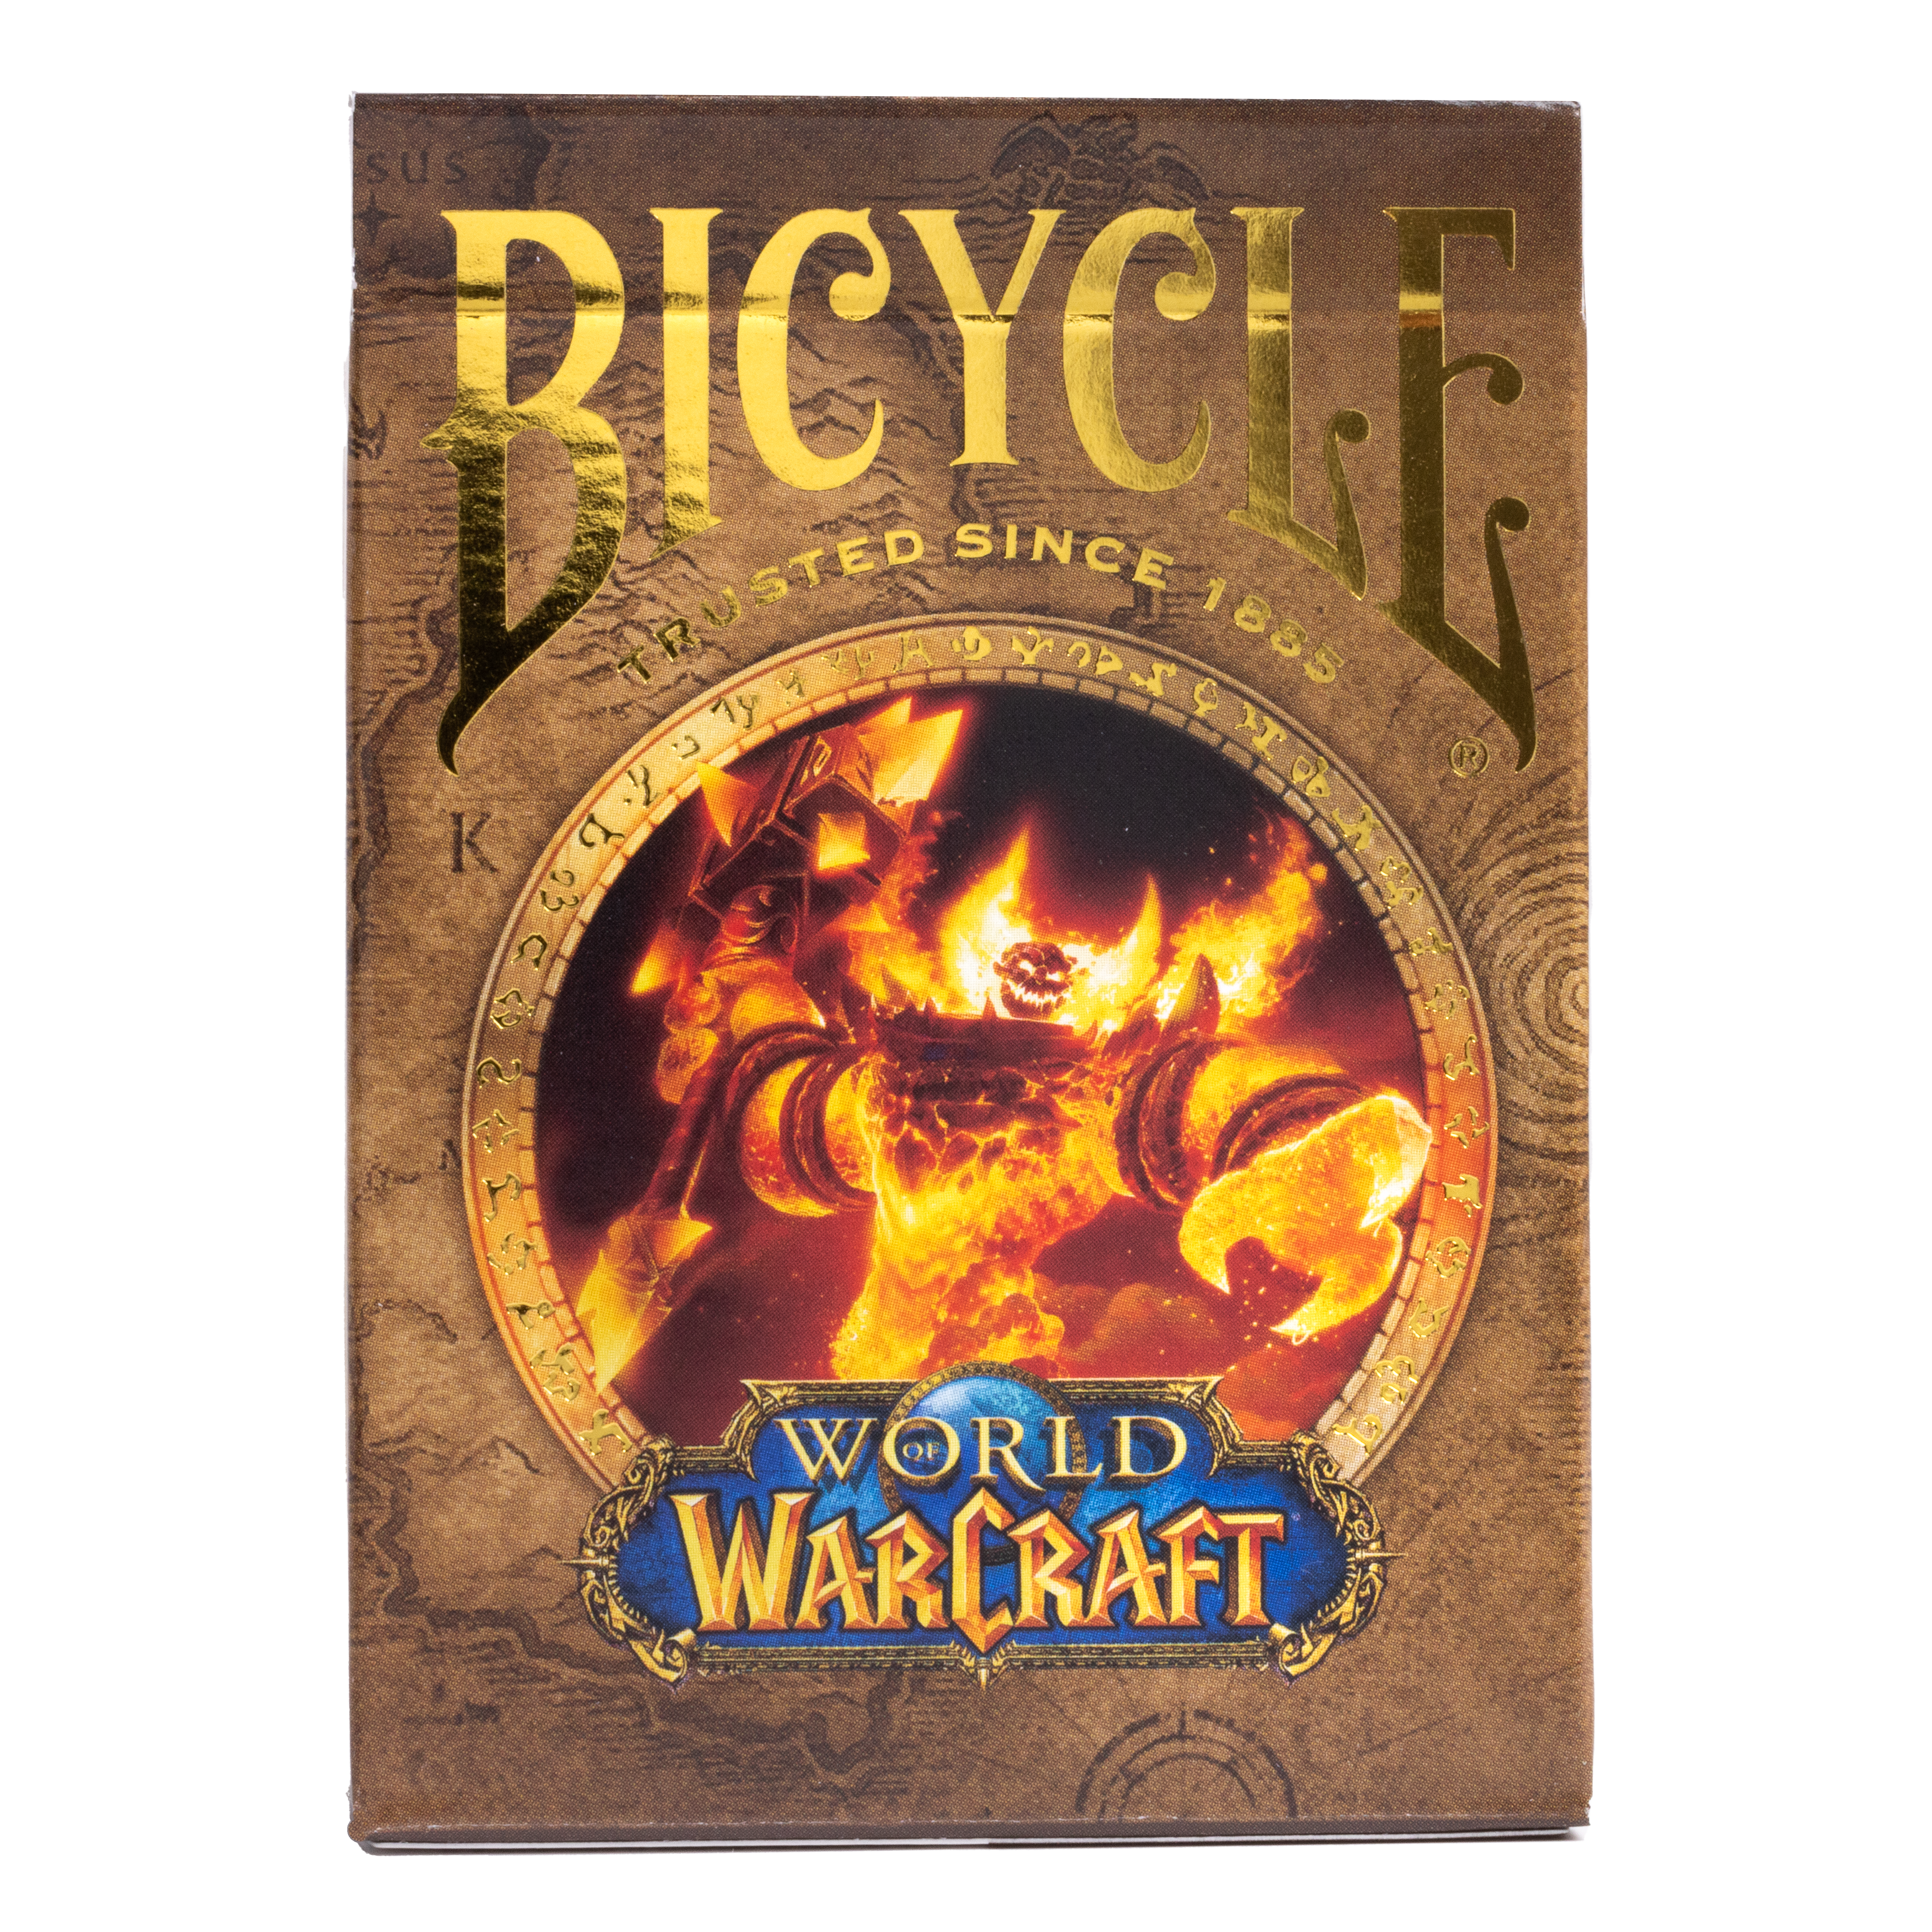 Bicycle World of Warcraft Classic Card Game